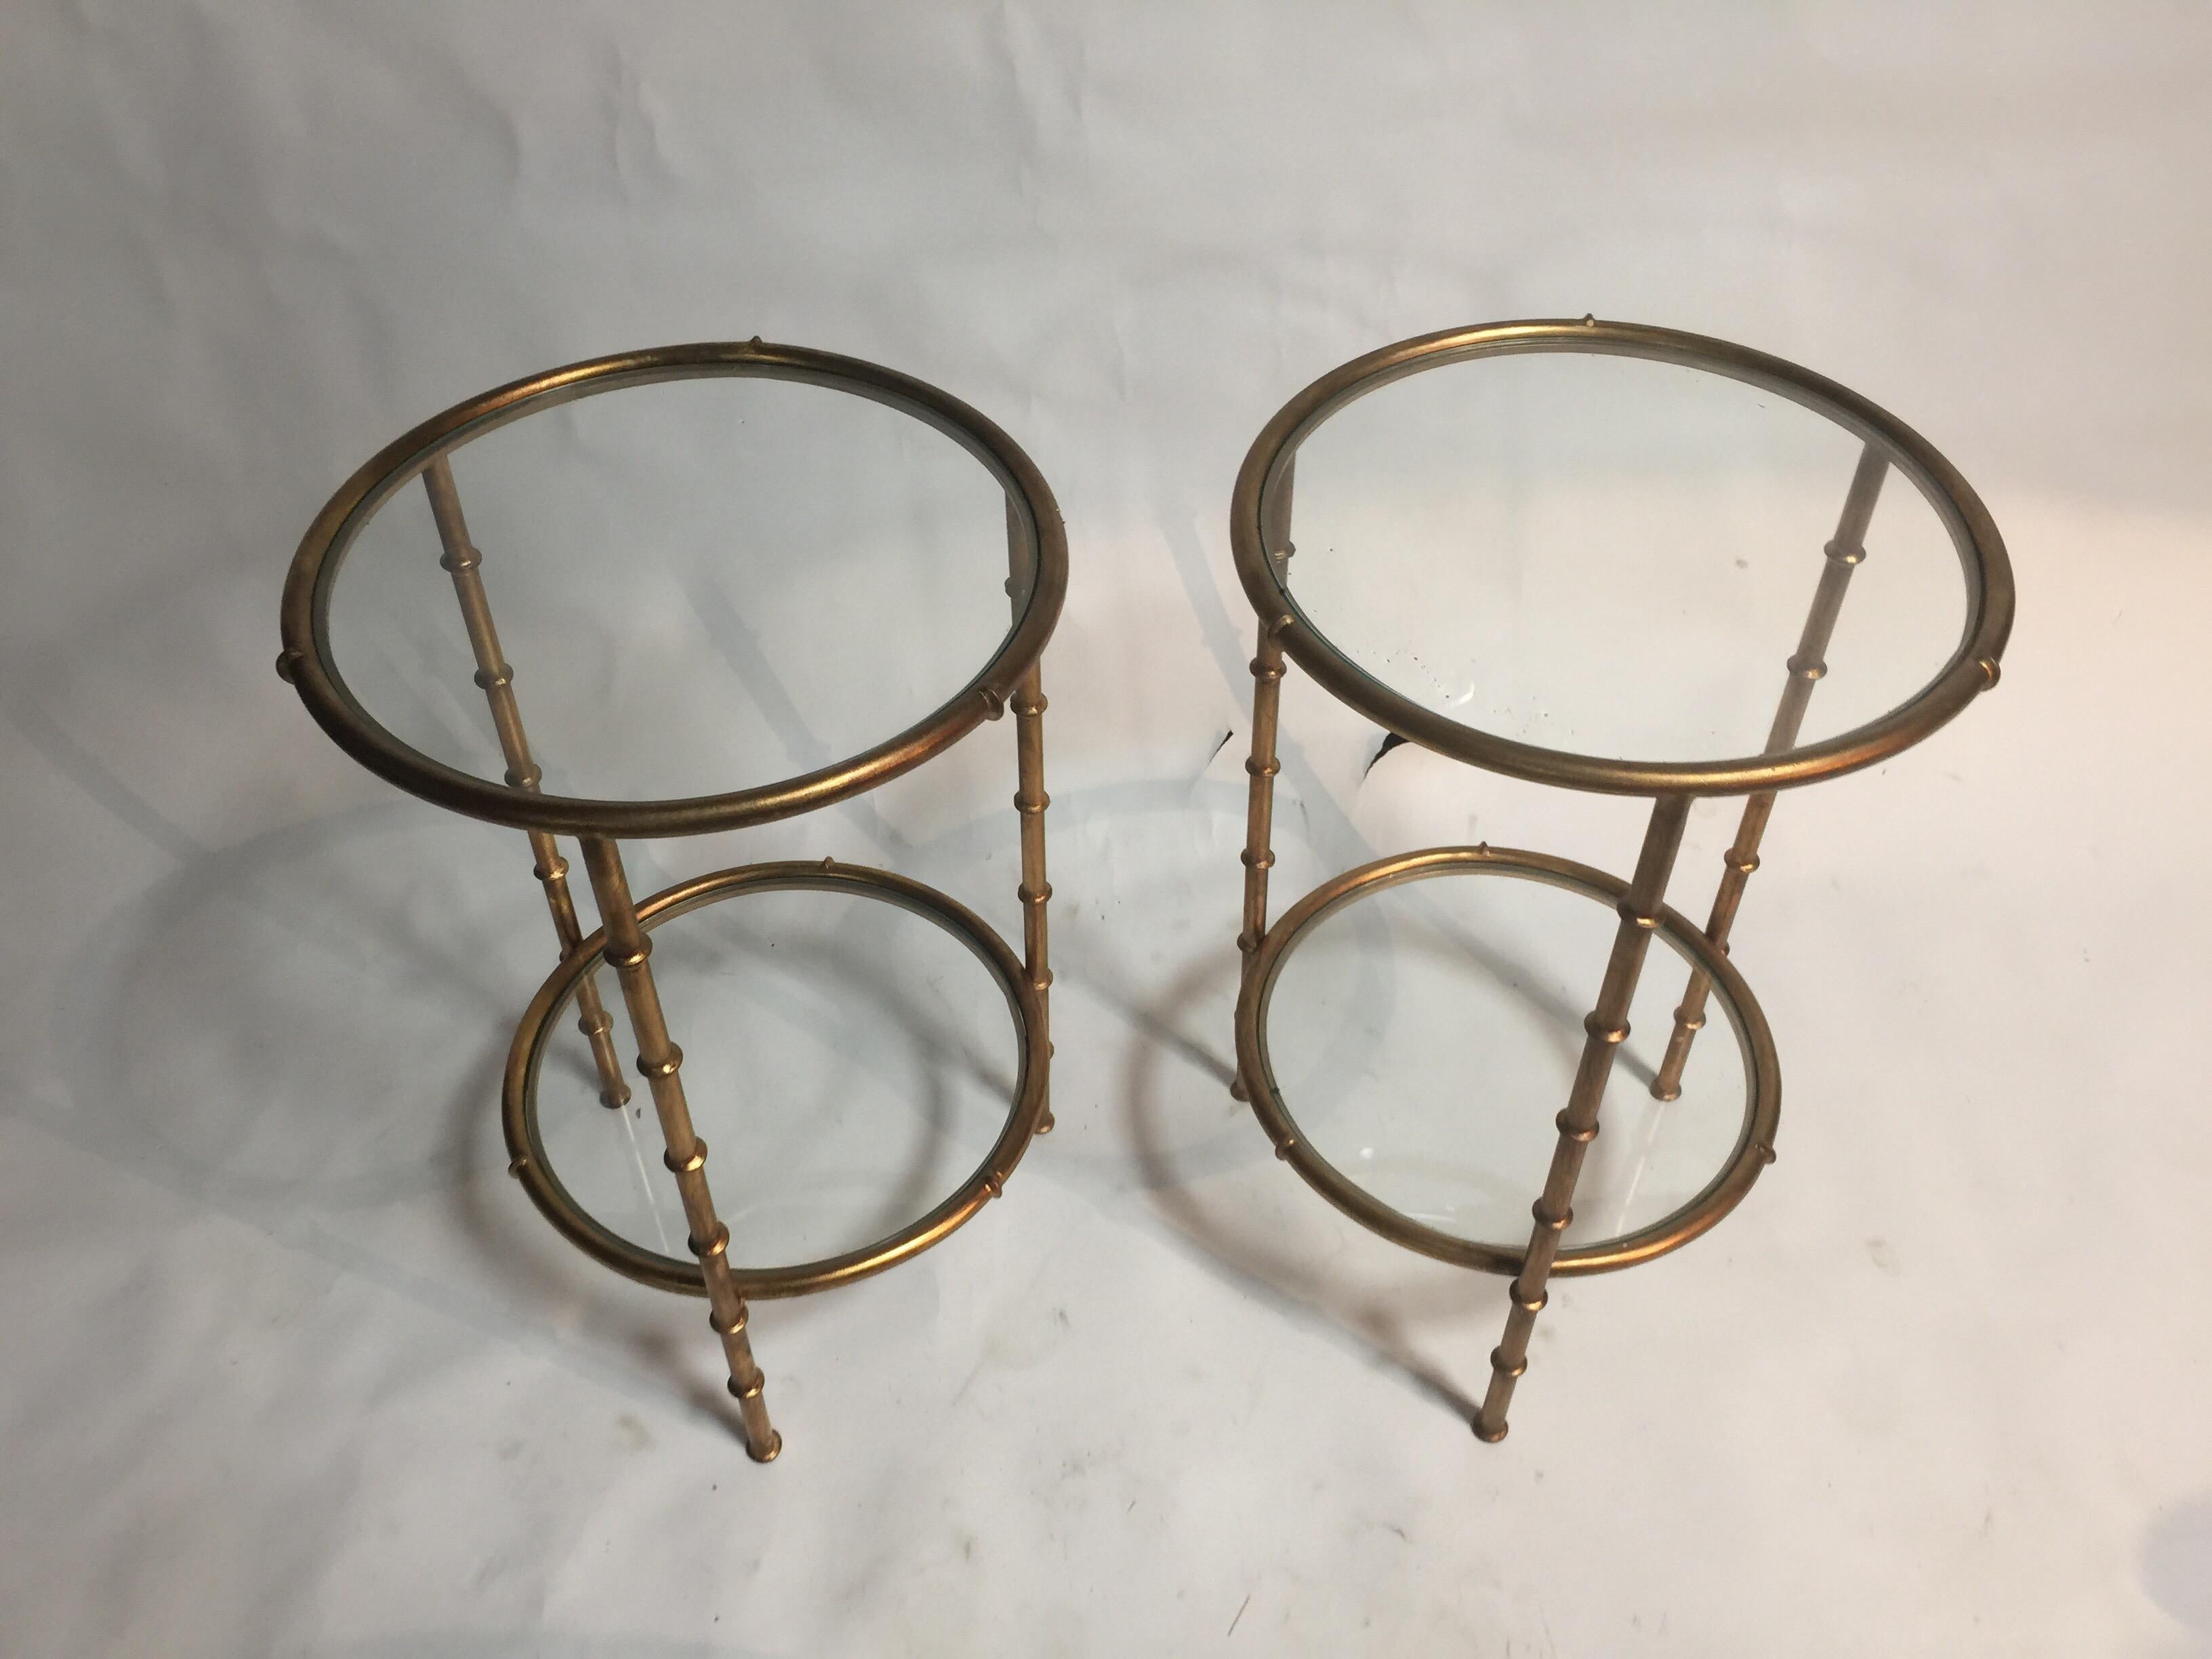 A pair of French-style gilt metal end tables with glass tops and lower shelves, circa 2000.

Dimensions:
15.75 inches W
24.5 inches H
7 inches H to floor between lower shelf and floor.